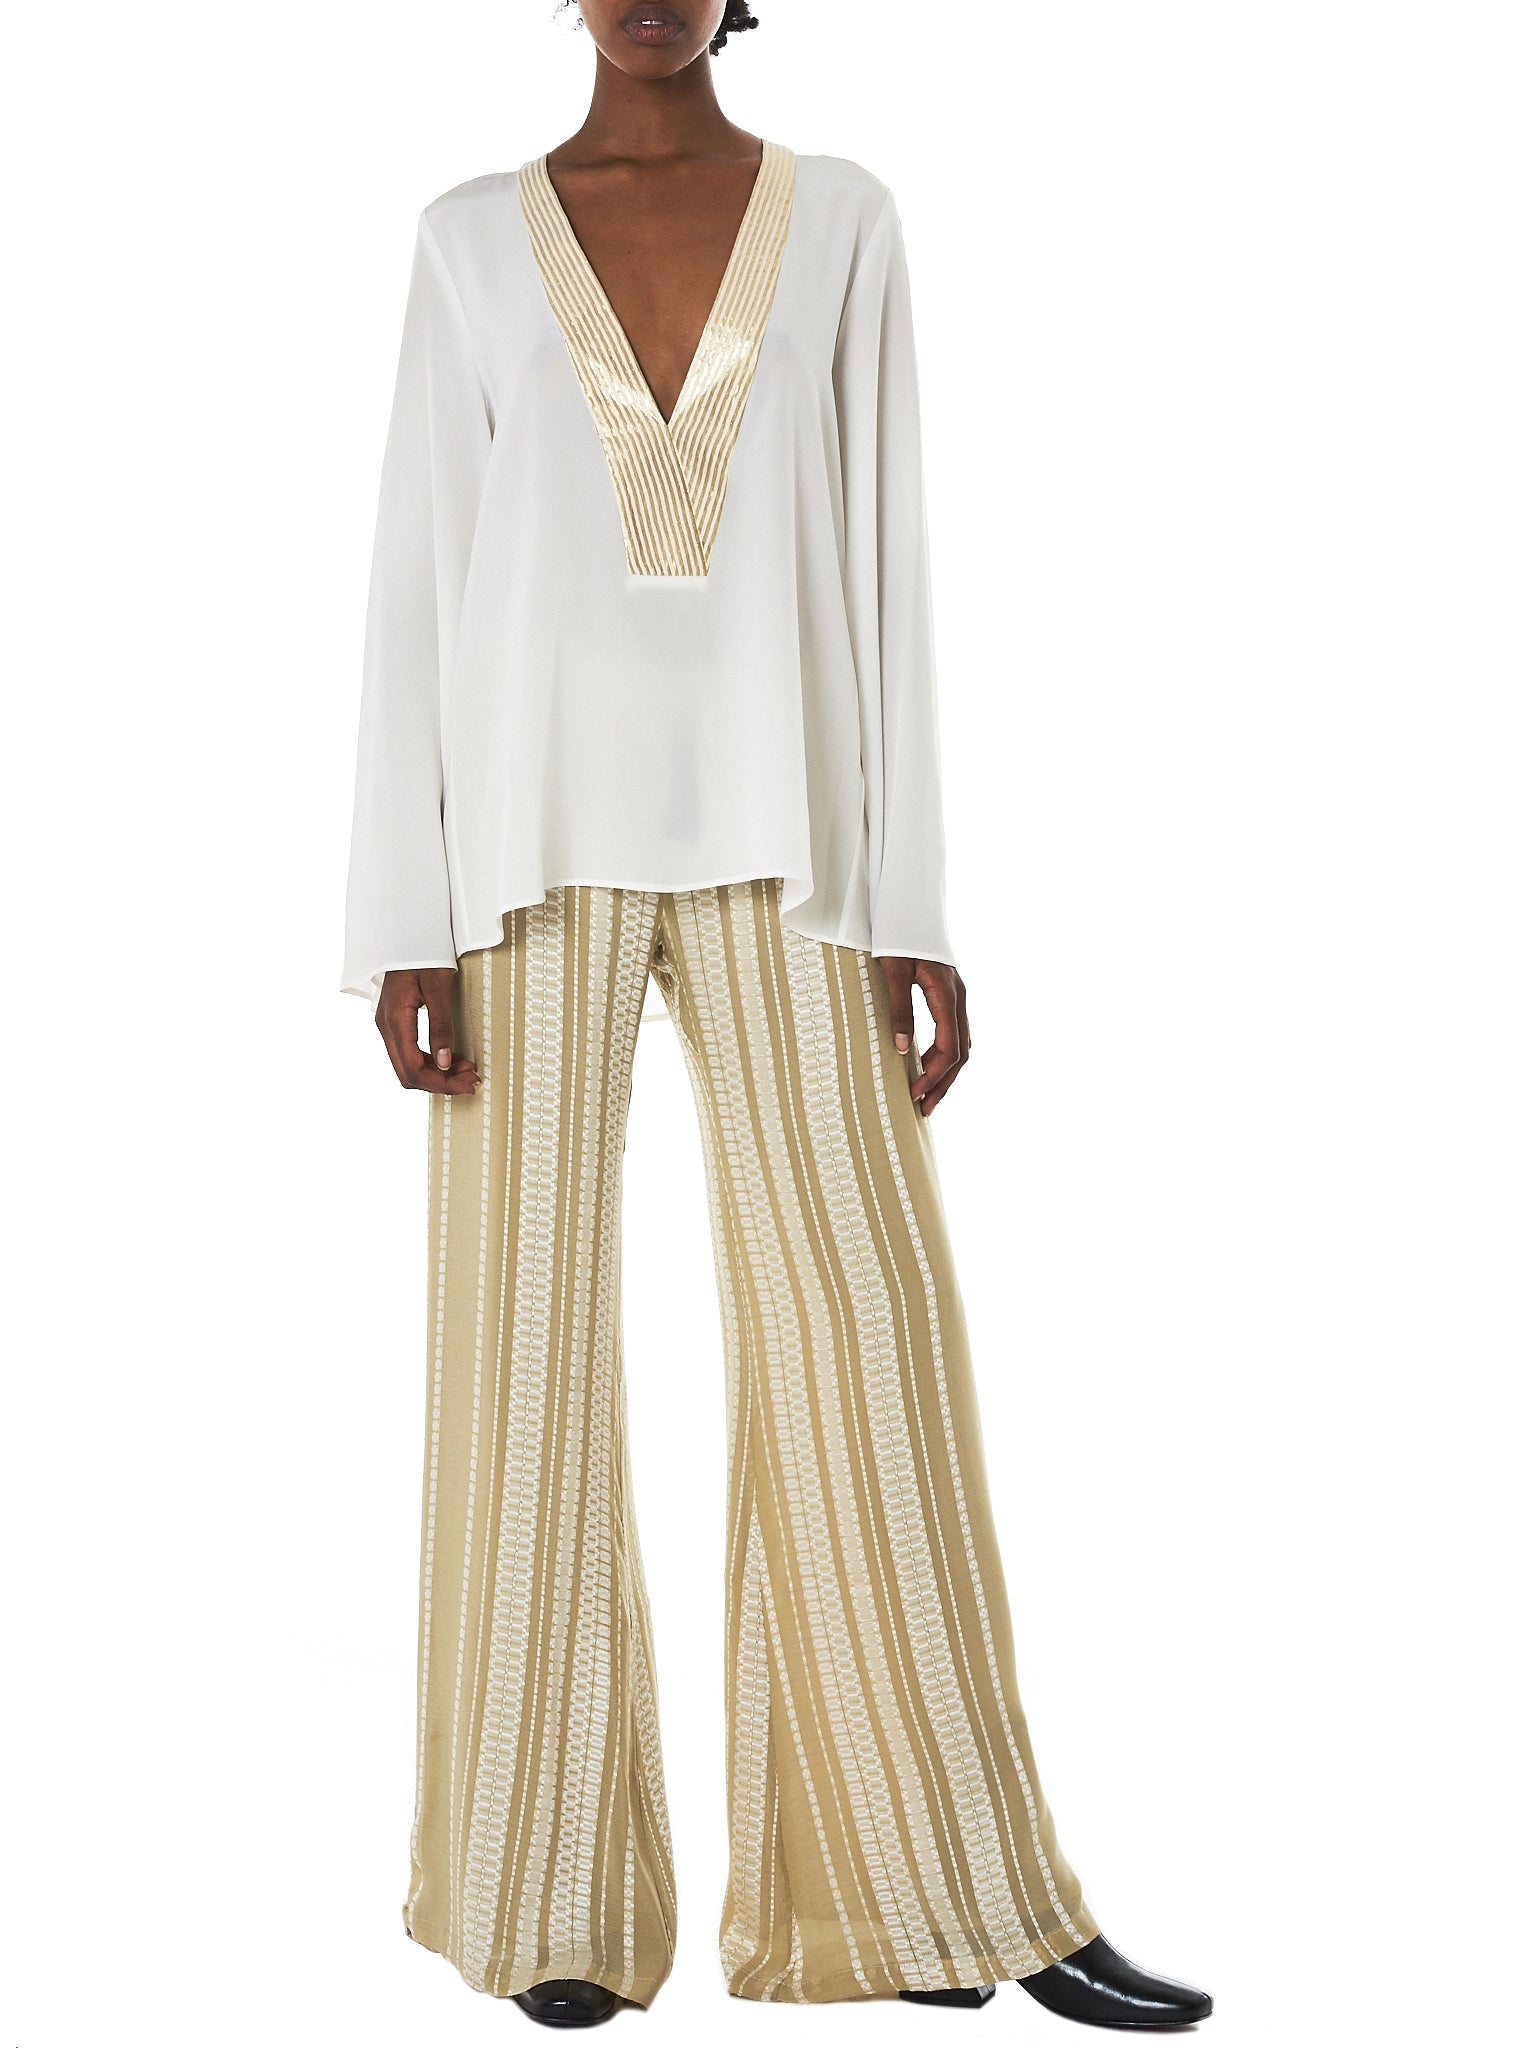 Zeus + Dione Gold Striped Blouse - Hlorenzo Style